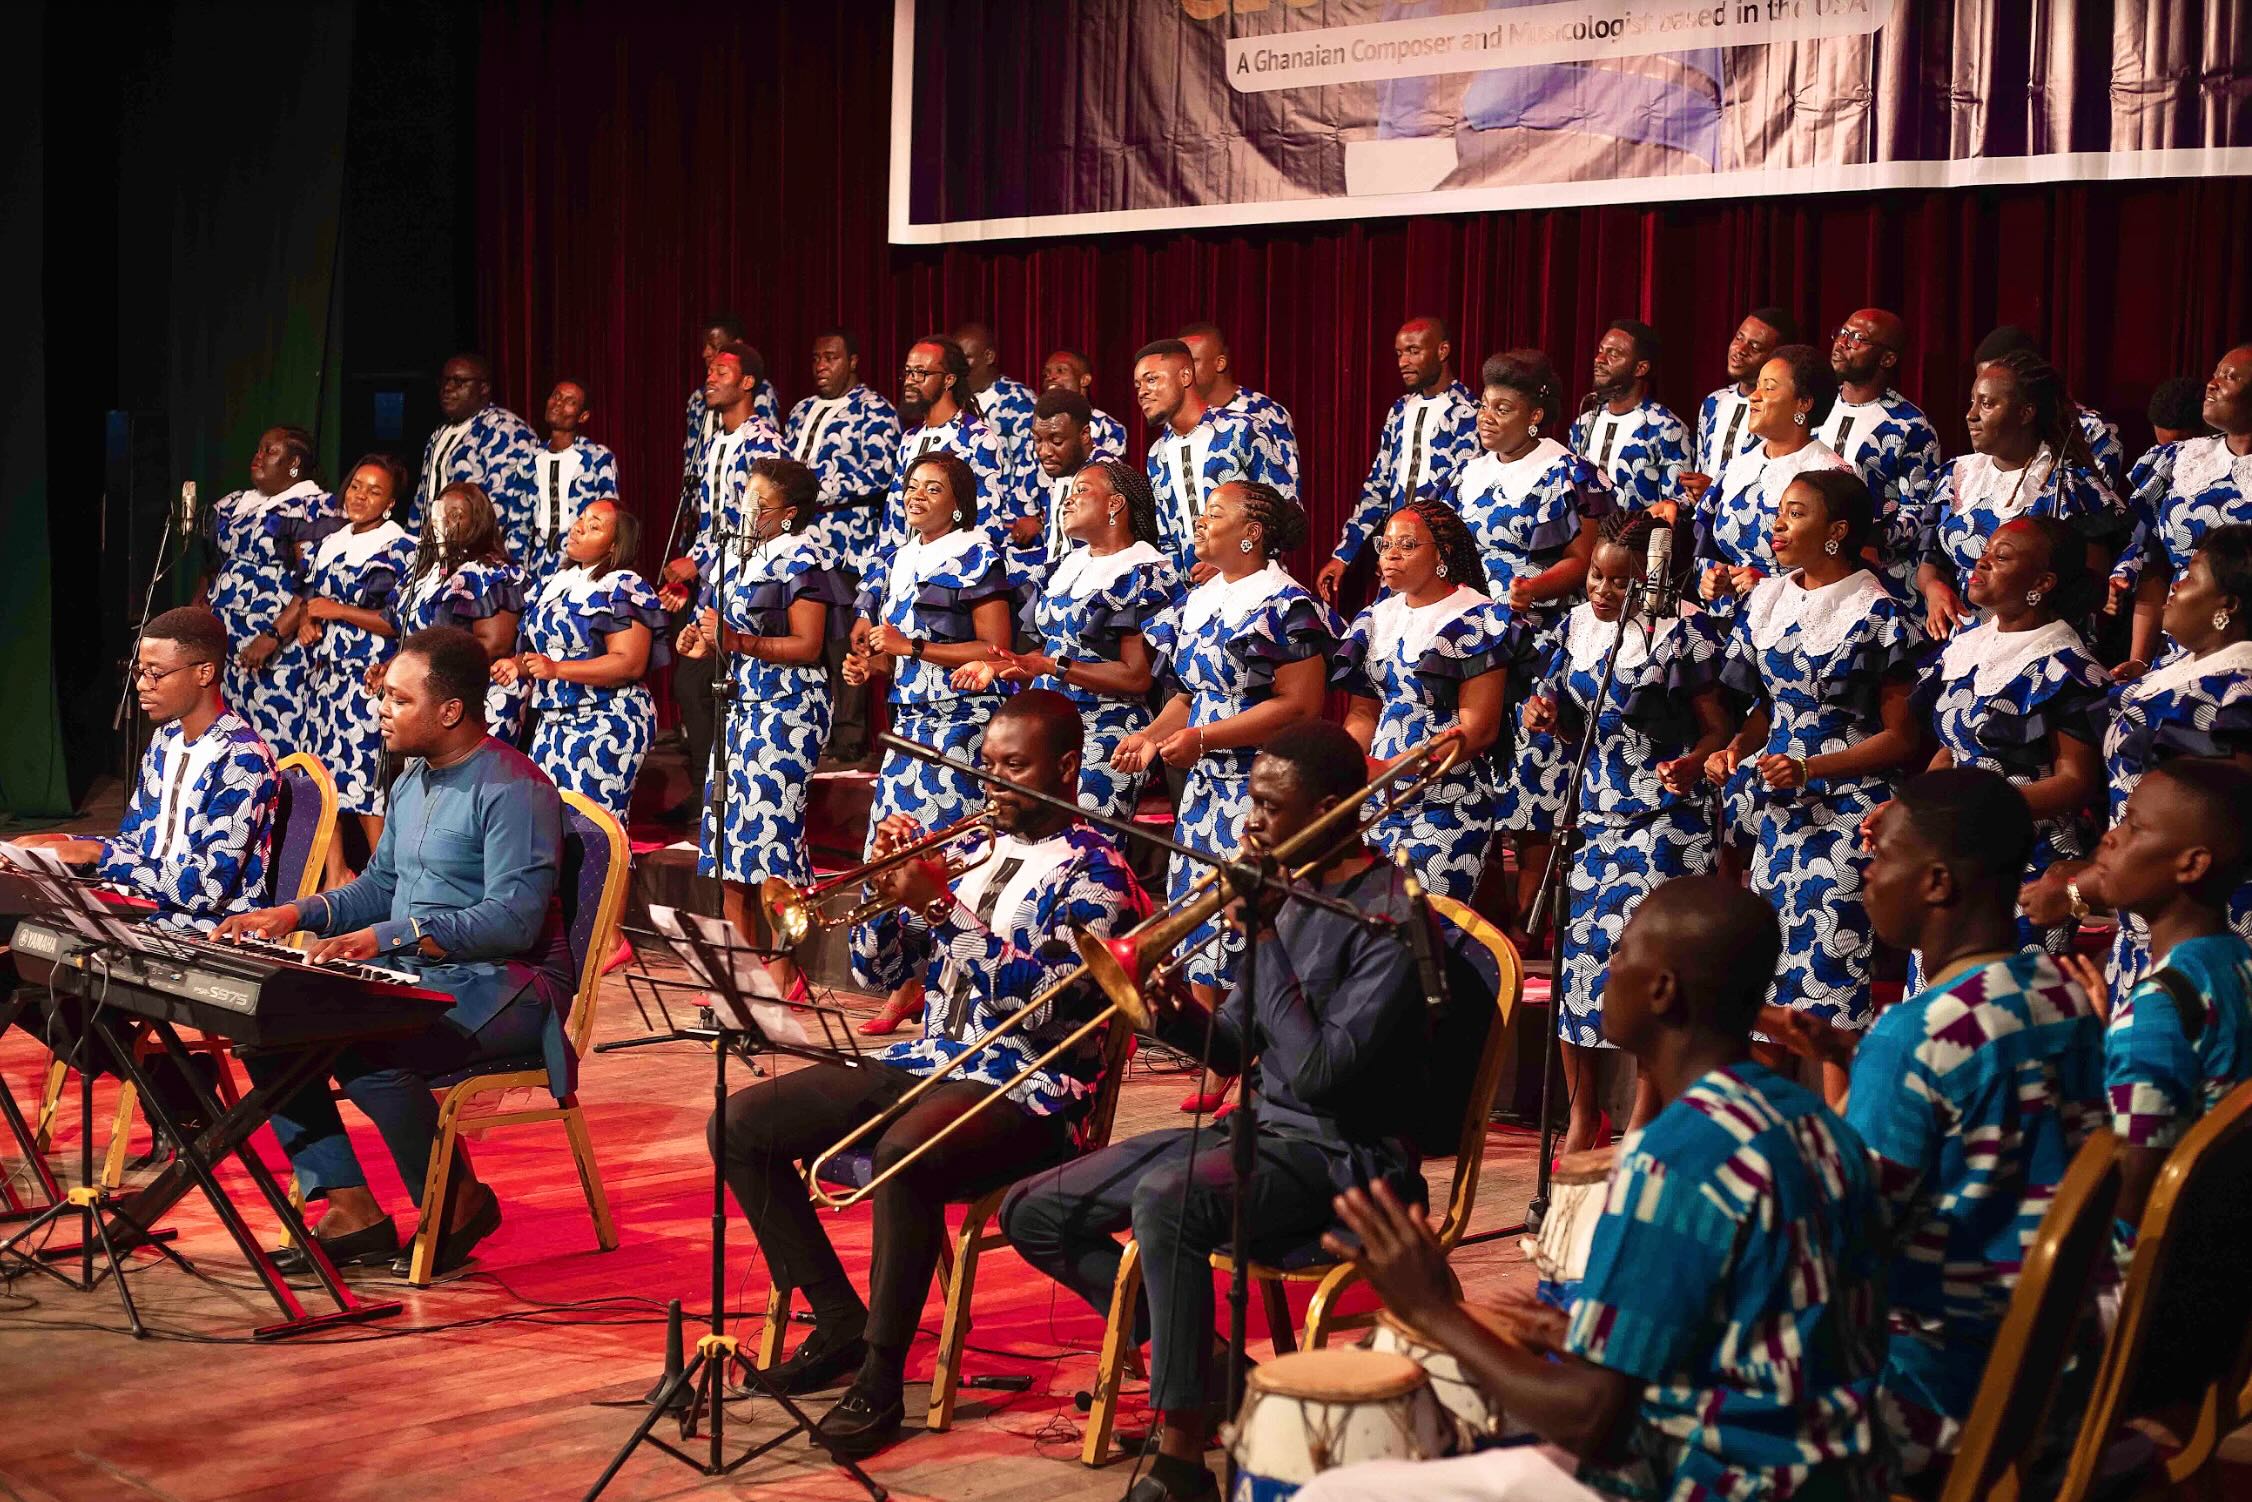 An Evening with Prof. George Worlasi Kwasi Dor Kwaku Boakye-Frempong was in the audience to witness a rare celebration of George Dor's music in Ghana.